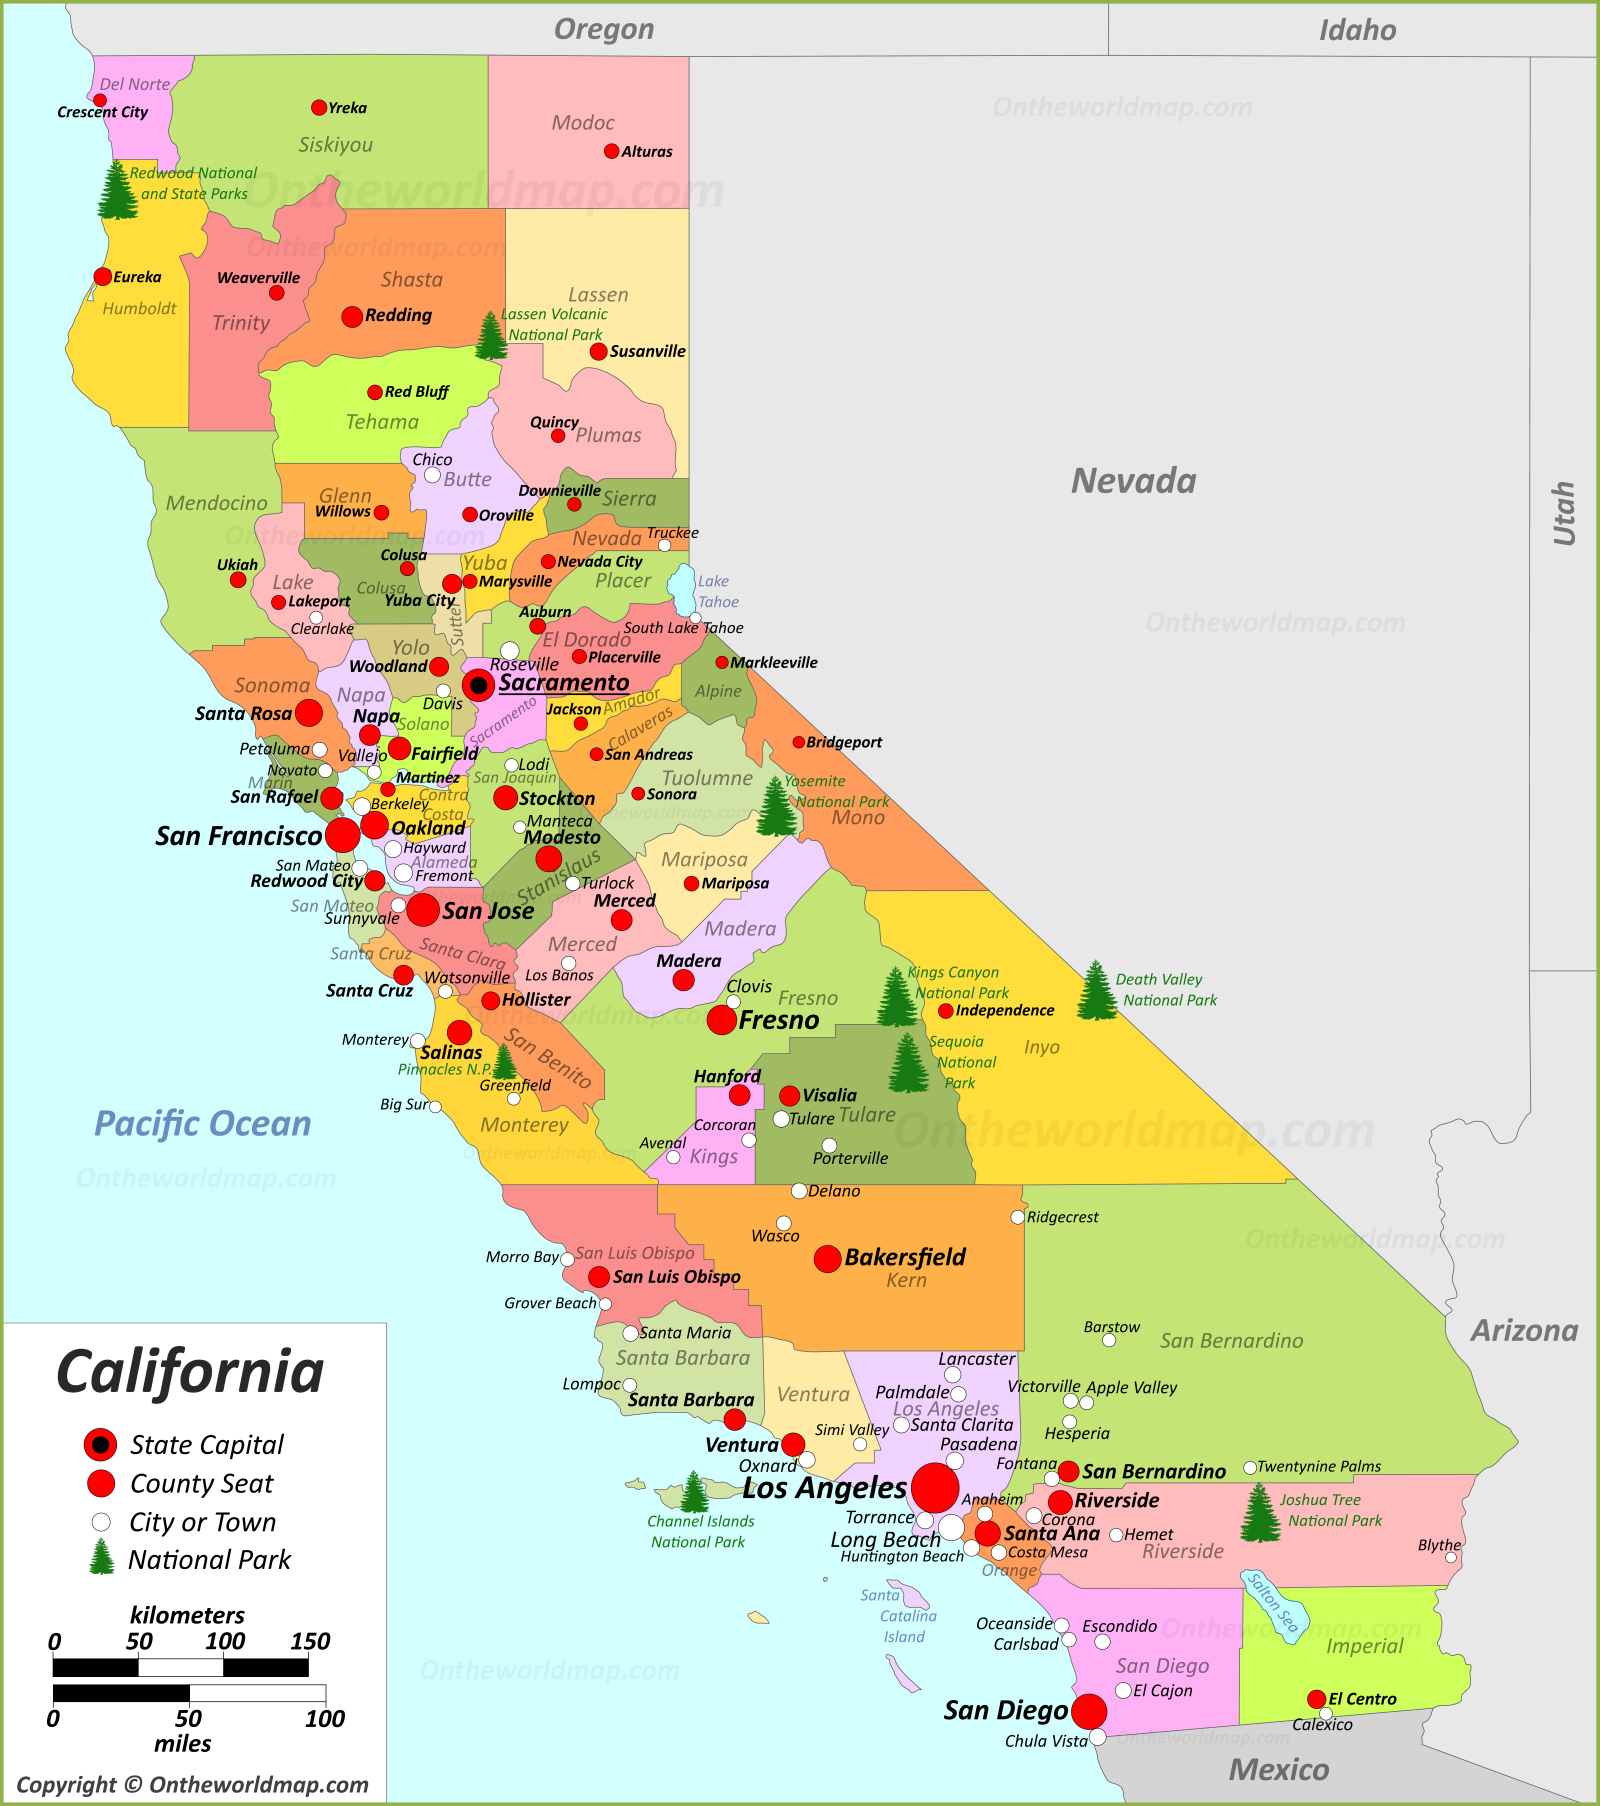 do toponyms in californina reflect cultural heritage township and range land survey system